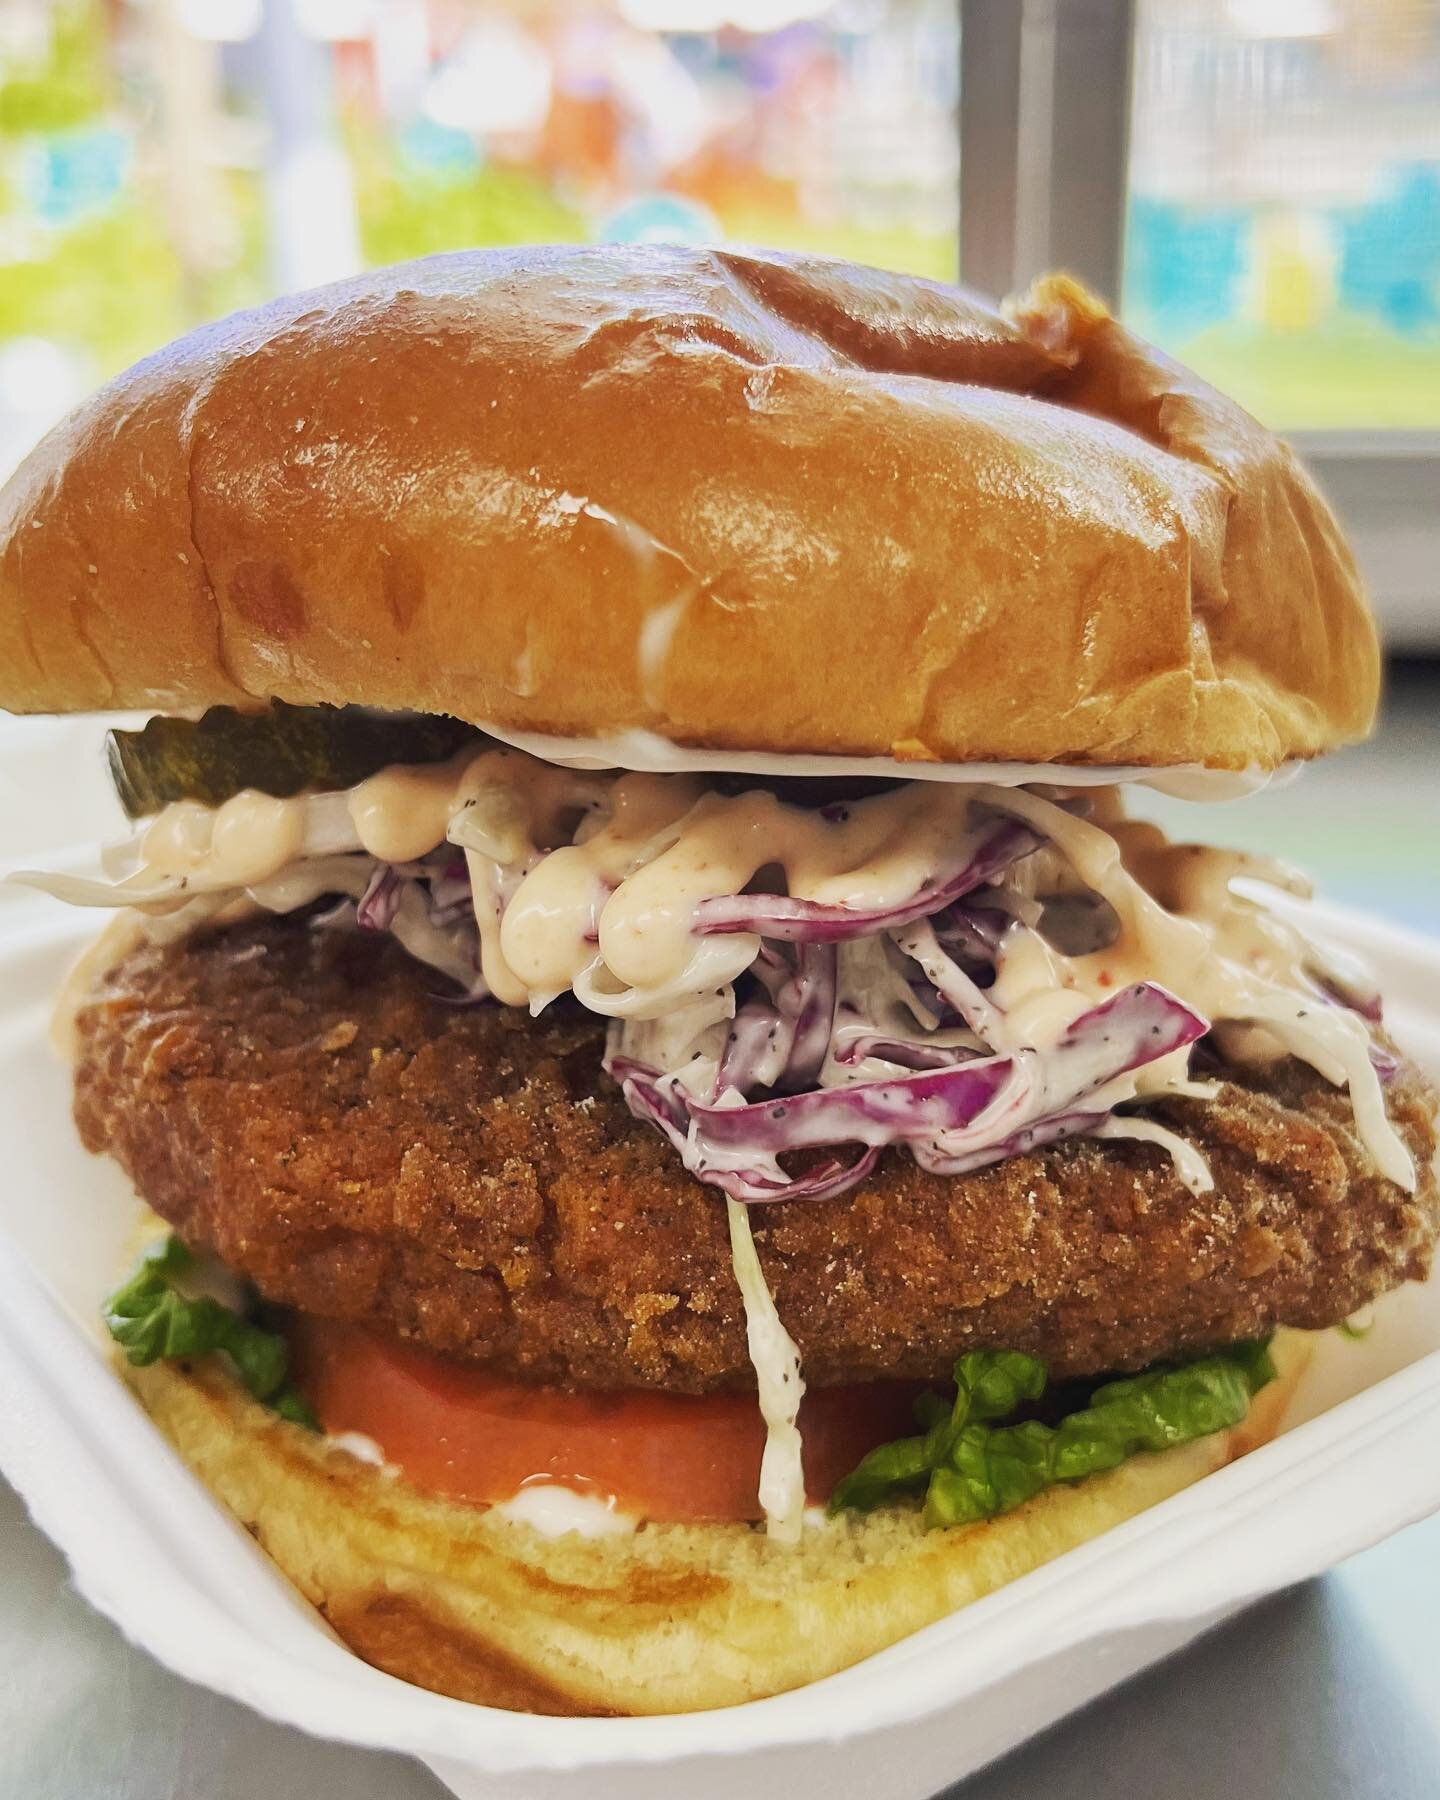 Crispy sandwich but add slaw! We&rsquo;ve been seeing more people make this move and we feel it&rsquo;s definitely worth sharing. The options here are endless with a near fully customizable menu for you to enjoy 🌱🍔😋

ALSO! Today we&rsquo;re giving